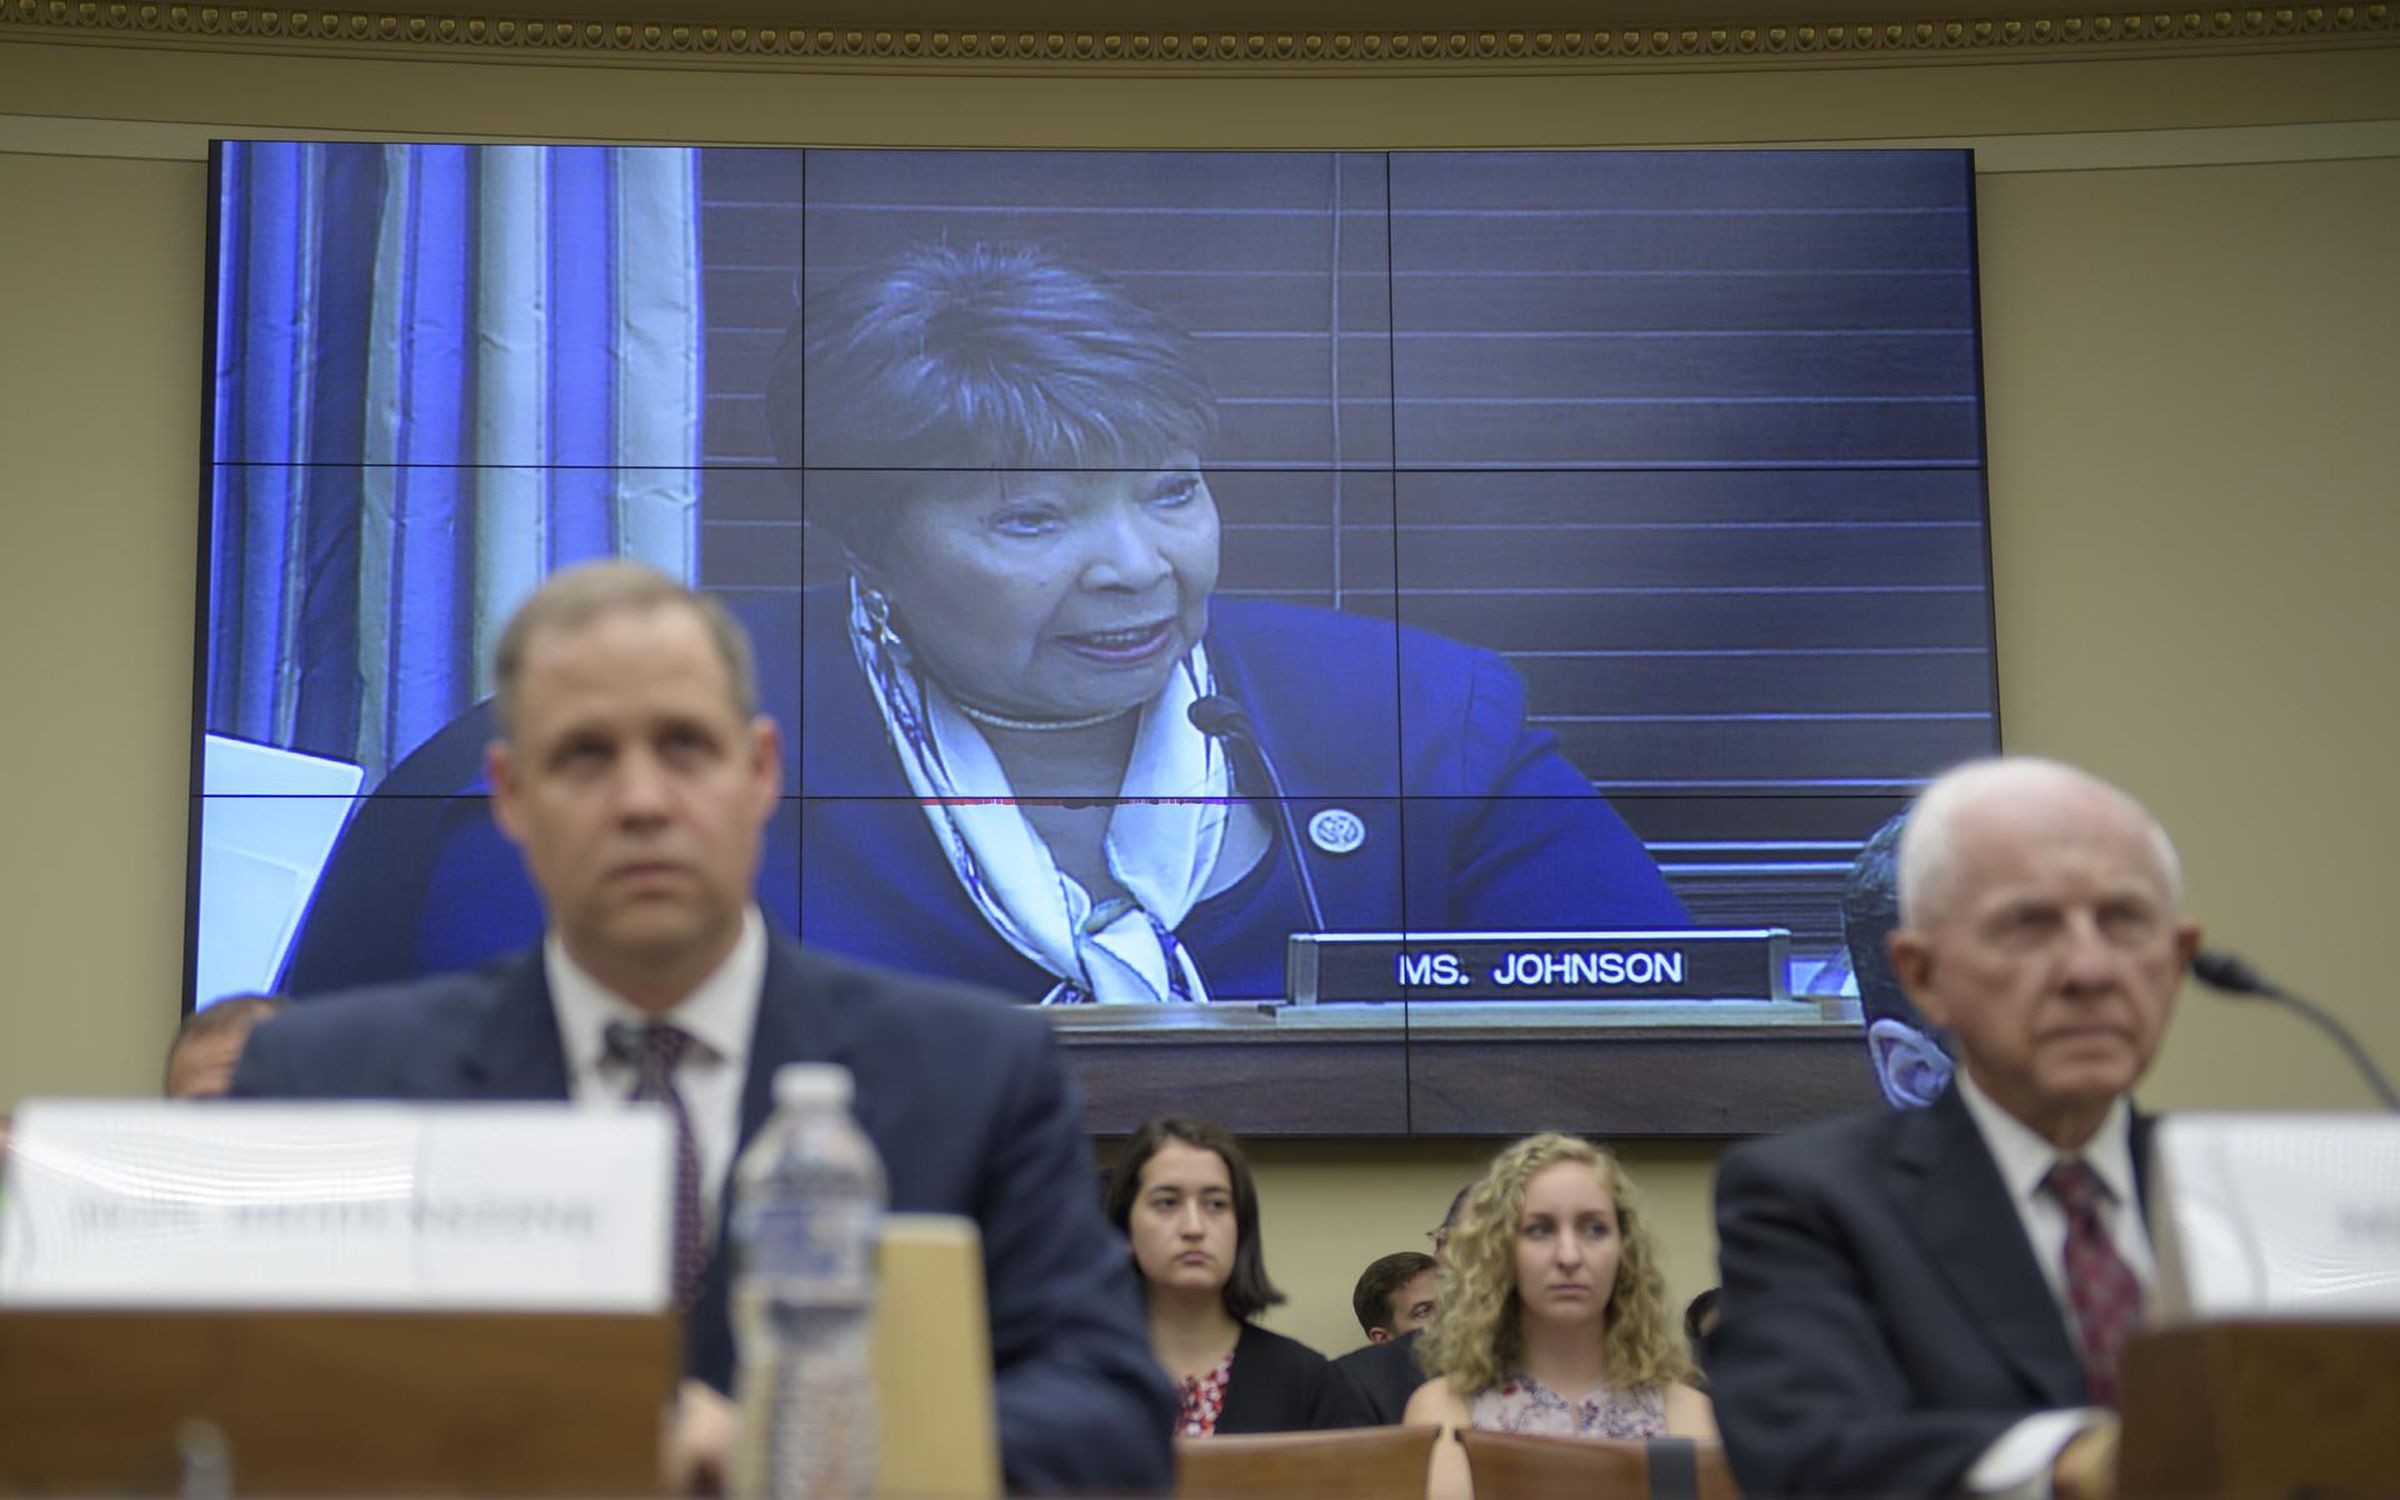 Rep. Eddie Bernice Johnson (D-TX) speaks at a hearing on JWST with NASA administrator Jim Bridenstine and Tom Young, chairman of the JWST Independent Review Board, in attendance.